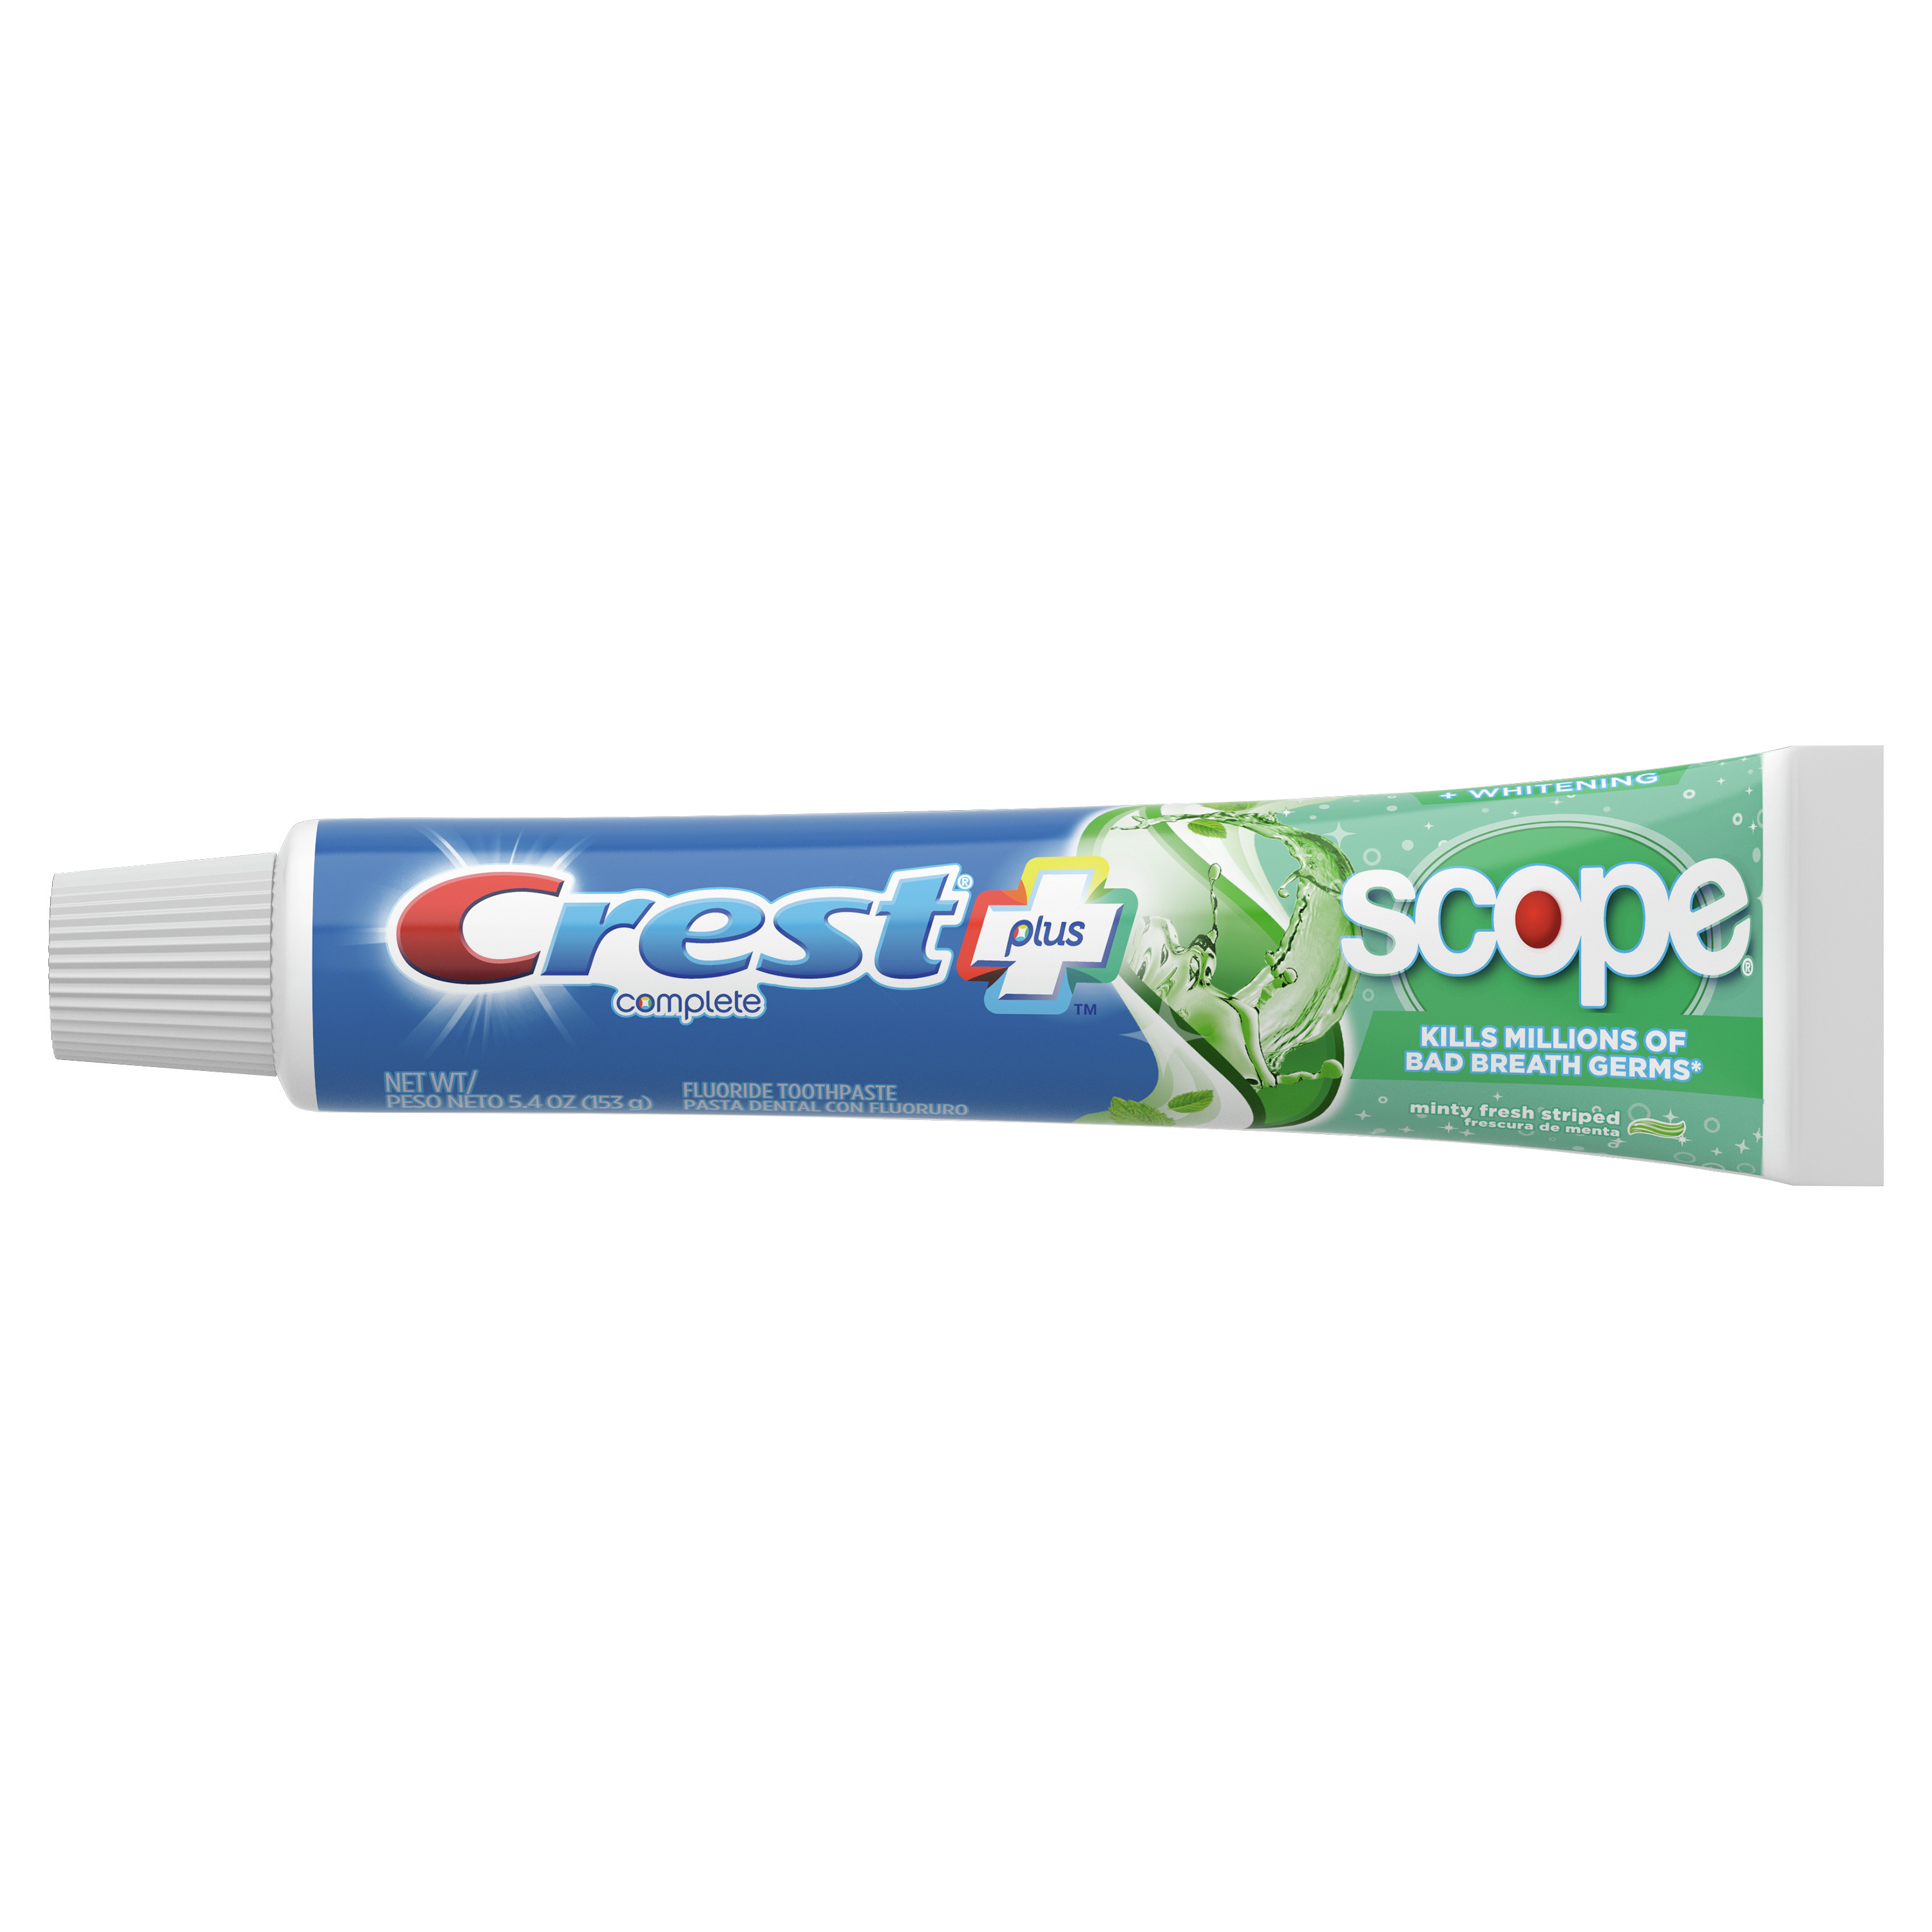 Crest + Scope Complete Whitening Toothpaste, Minty Fresh, 5.4 oz, Pack of 3 - image 2 of 9